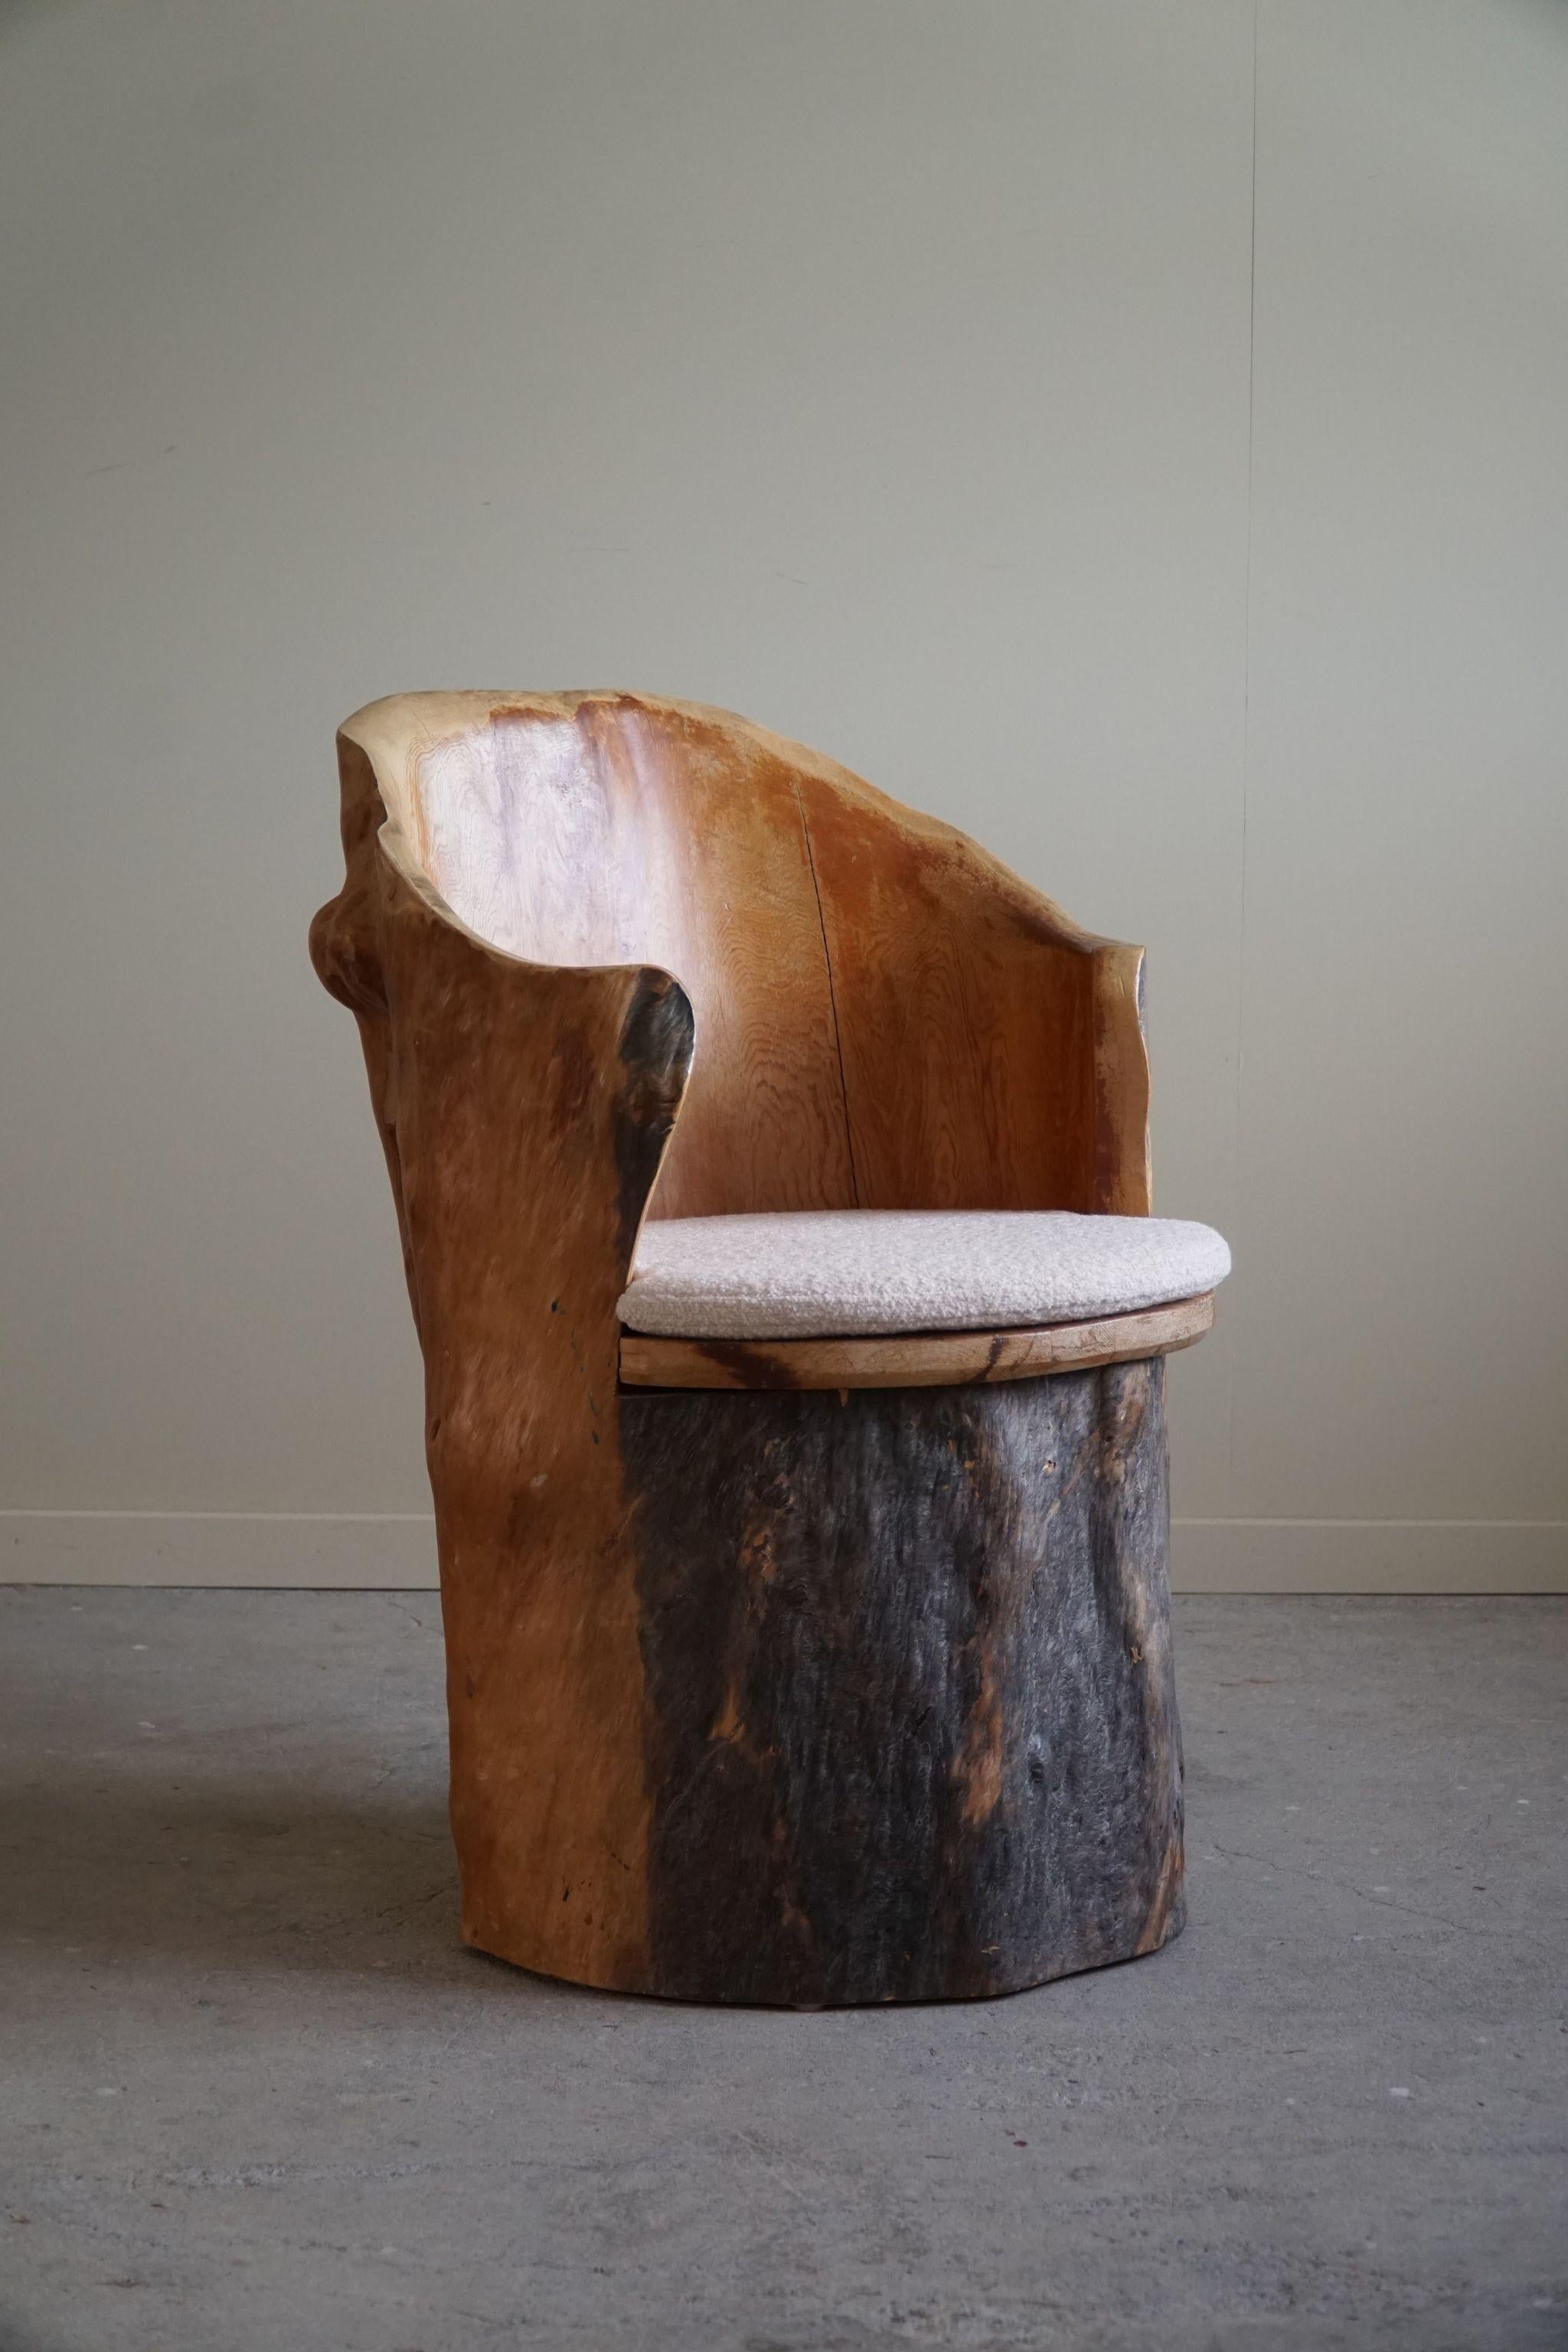 Hand-Carved Brutalist Stump Chair in Solid Pine, Wabi Sabi Style, Swedish, 1970s For Sale 5